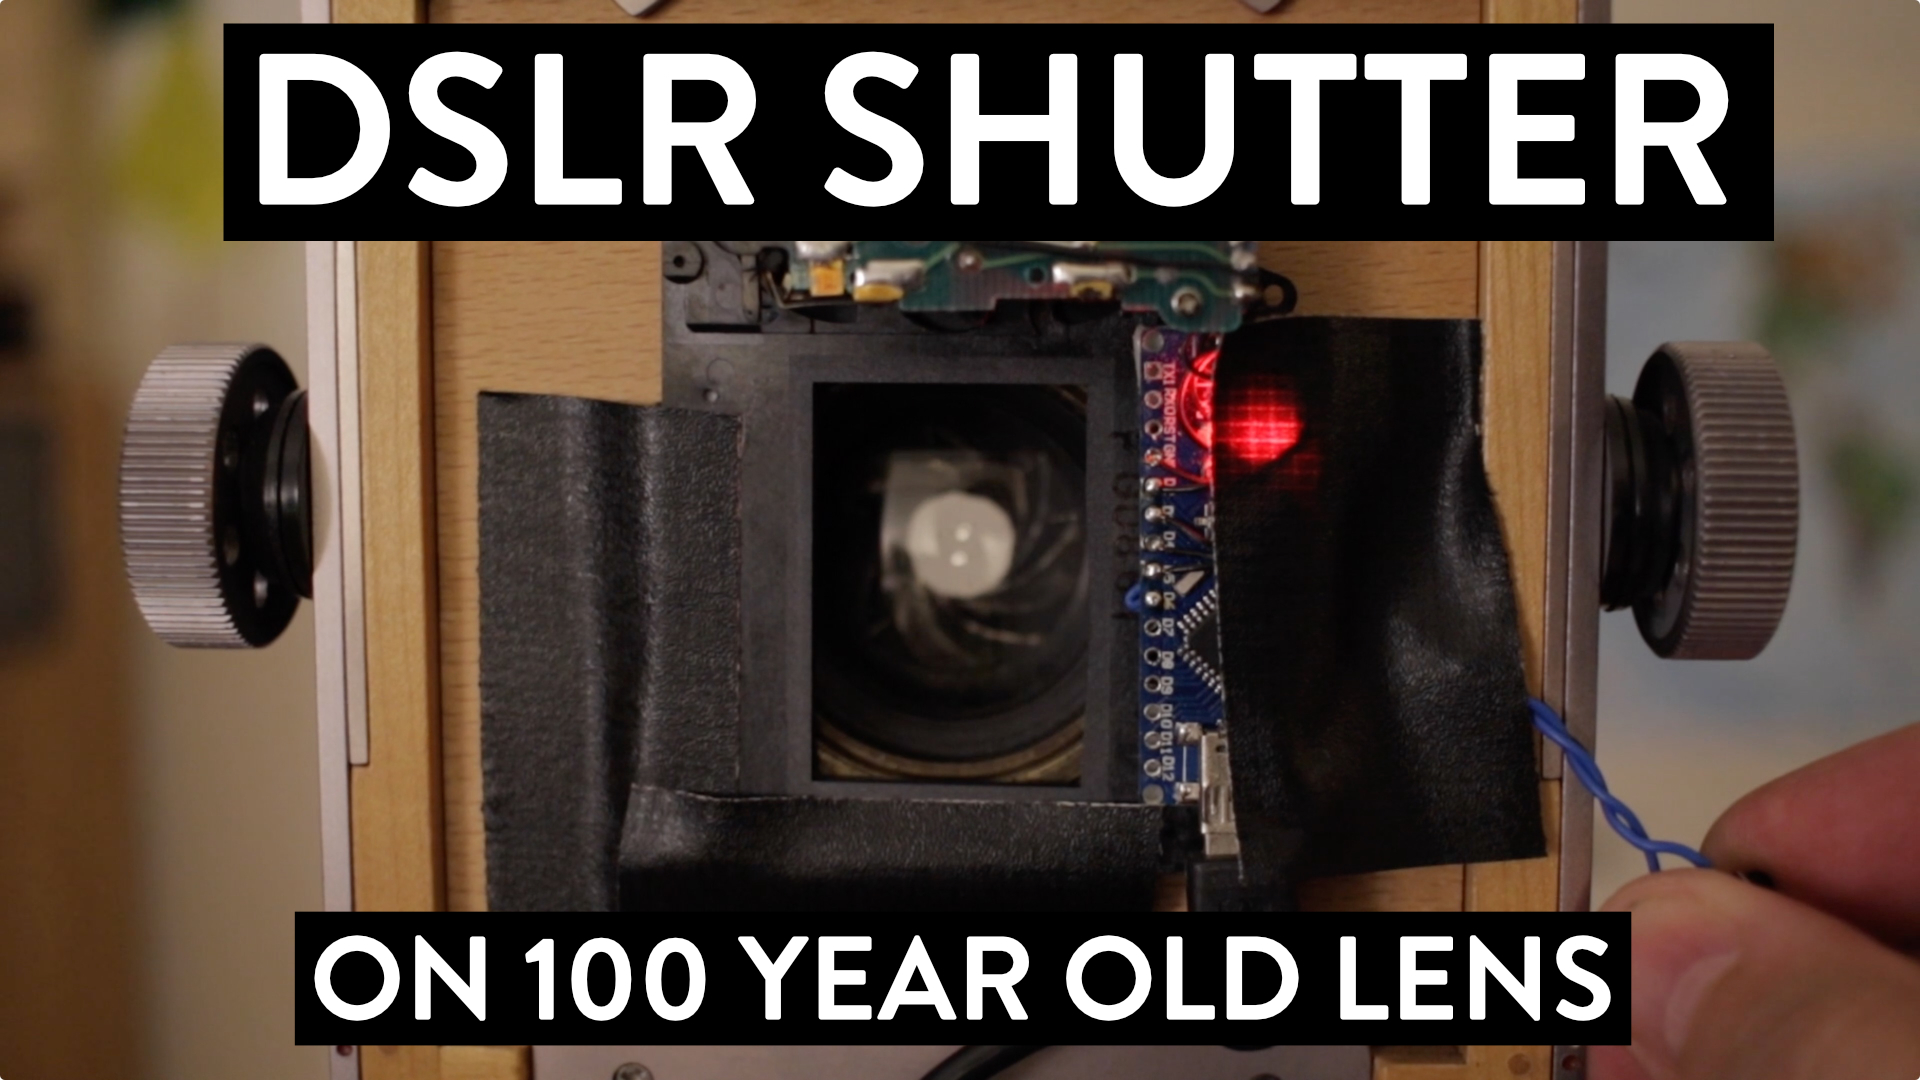 🇬🇧 The DSLR Shutter and the 100 Year Old Lens